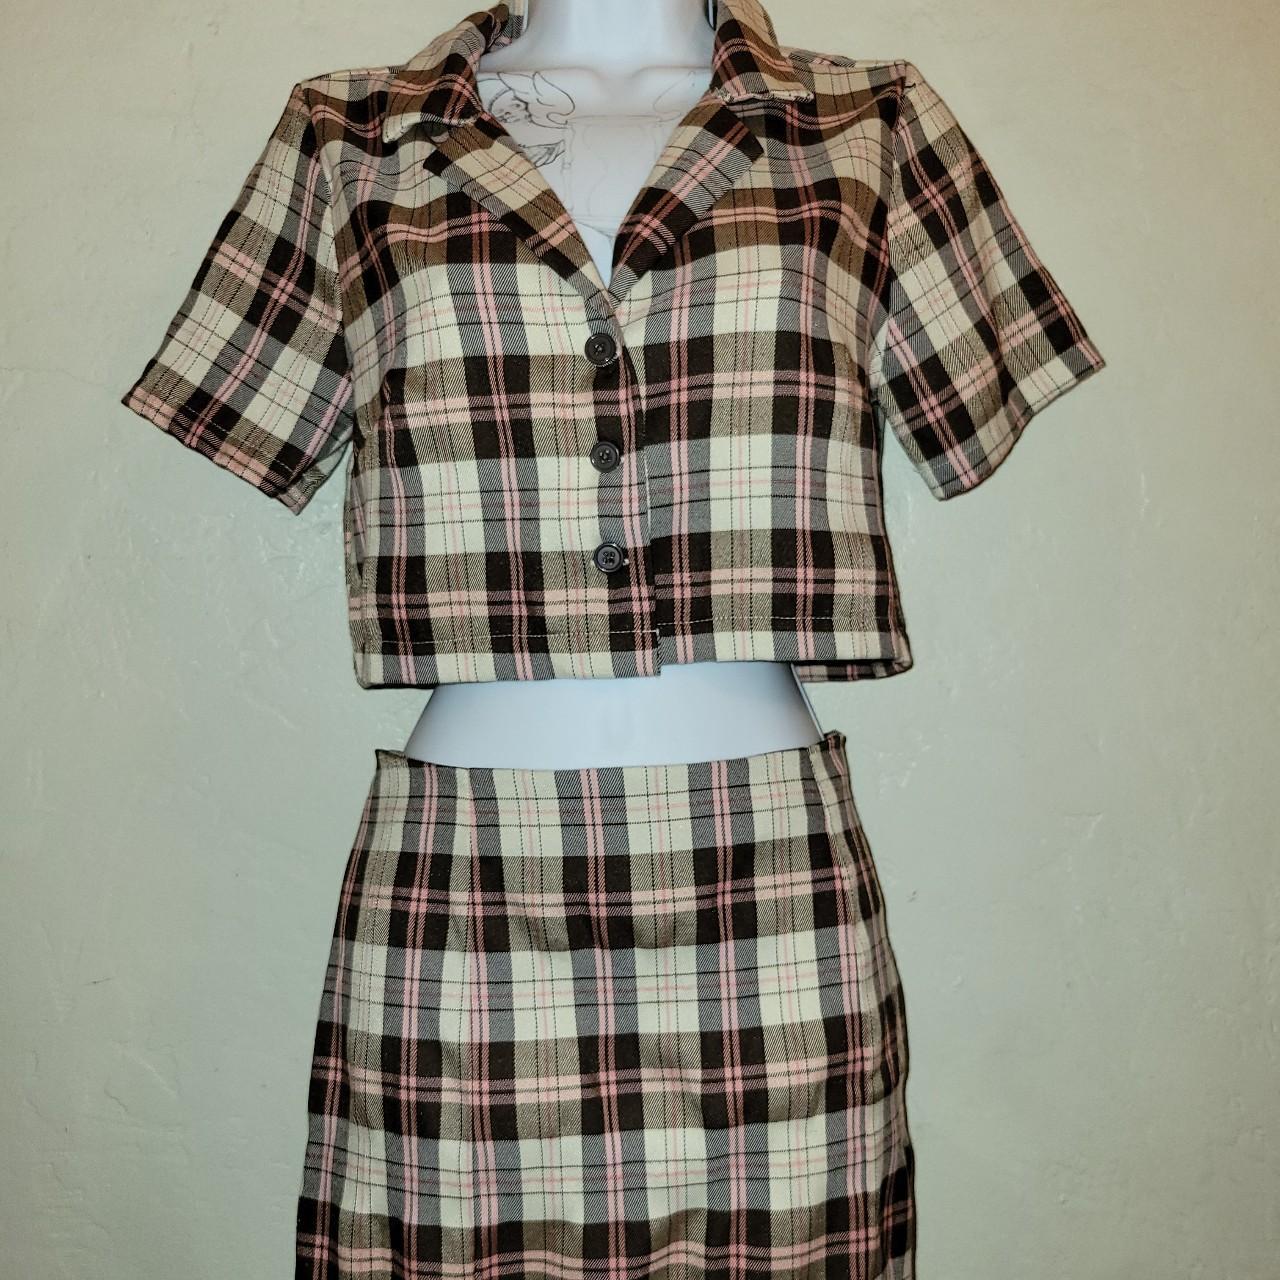 Product Image 1 - Plaid two piece skirt set💕

Clueless